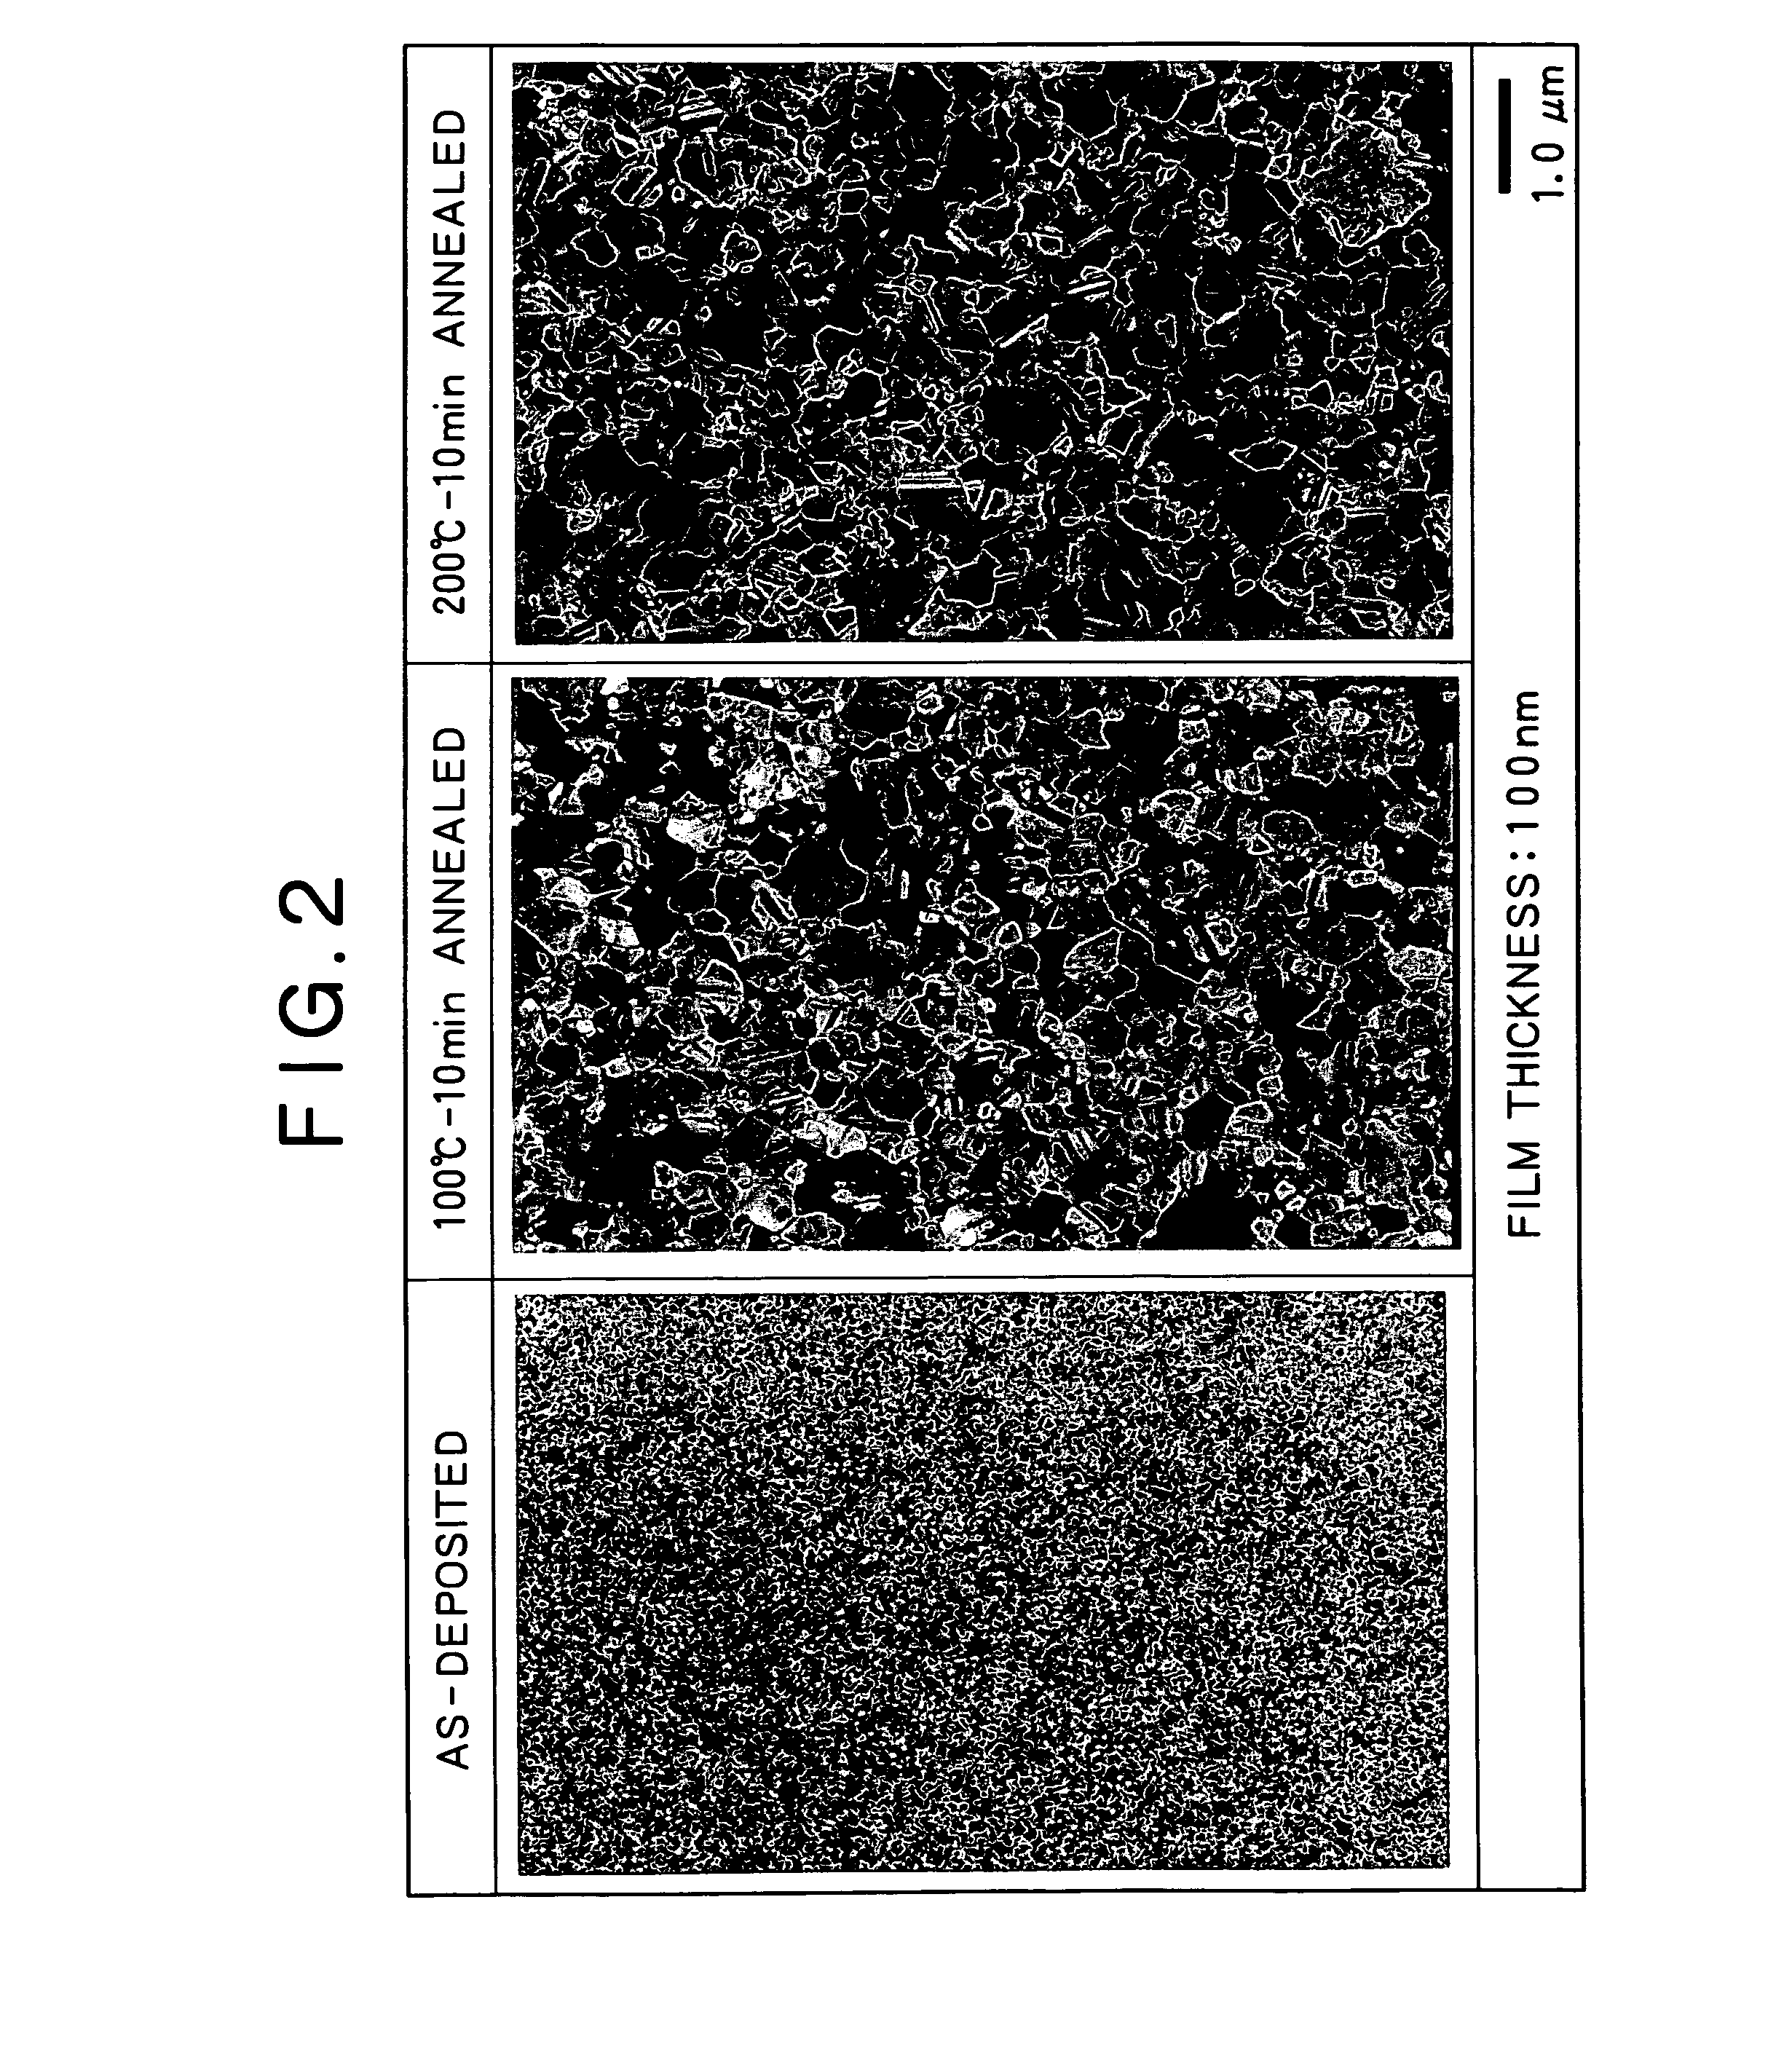 Reflective film, reflection type liquid crystal display, and sputtering target for forming the reflective film